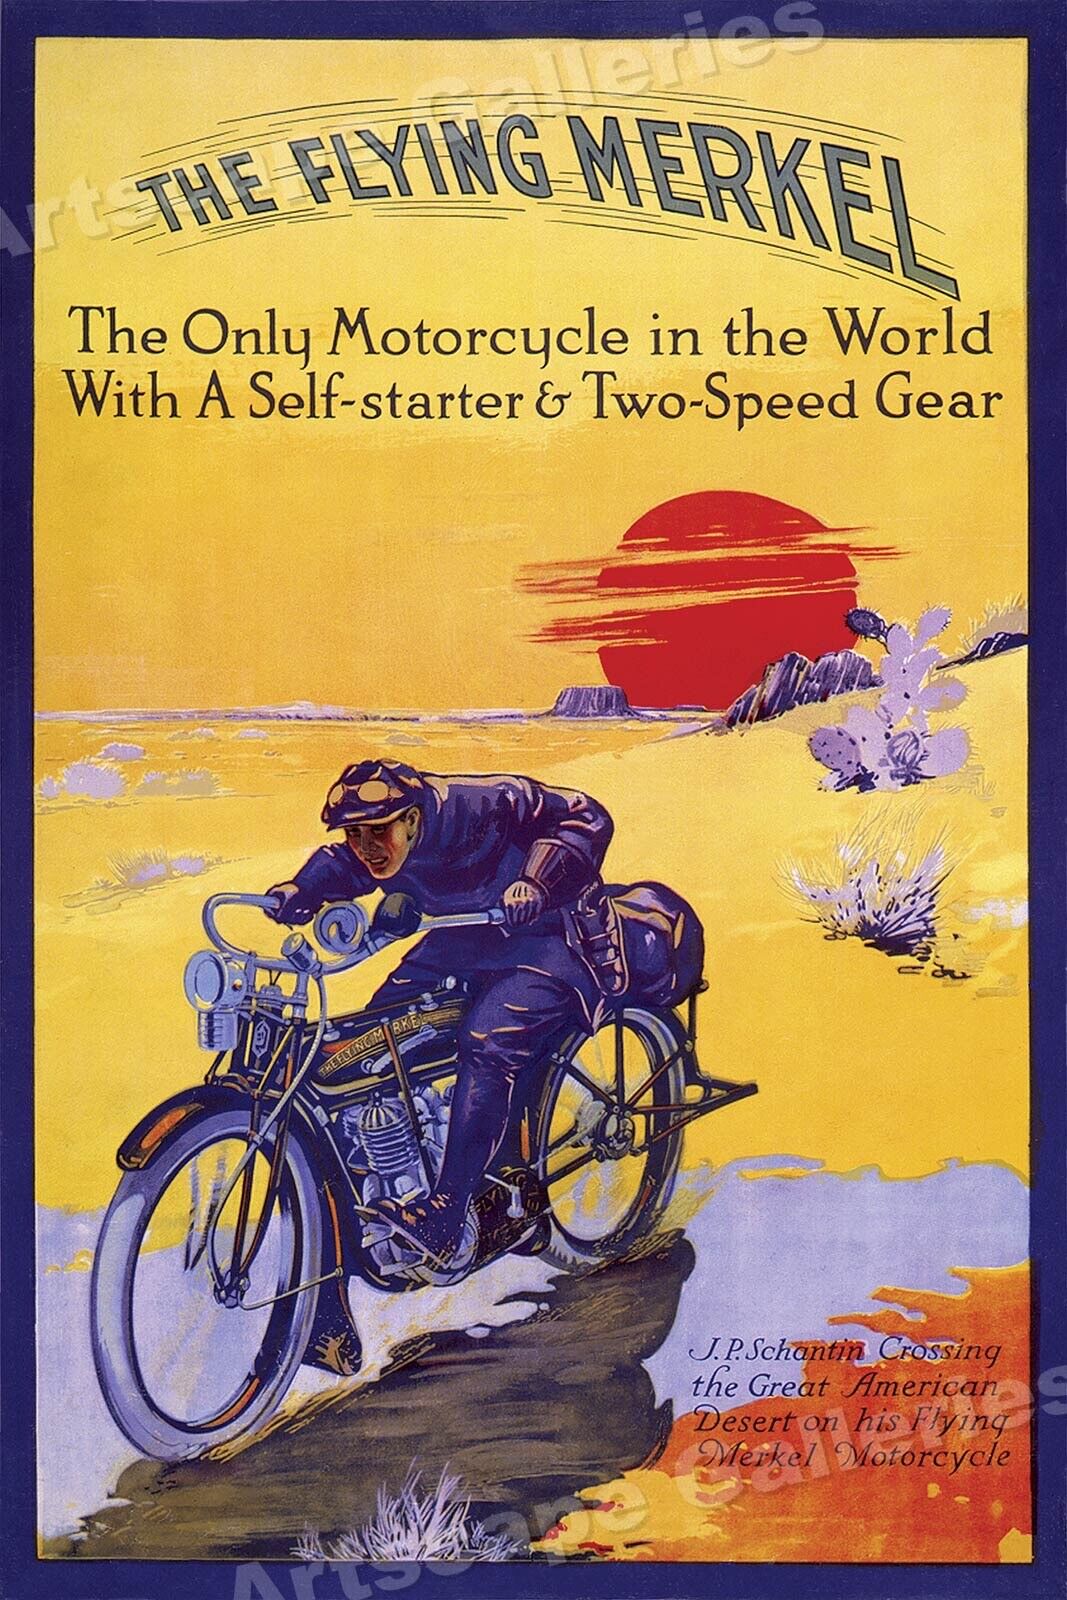 Flying Merkel 1913 Classic Motorcycle Touring Race Poster - 20x30